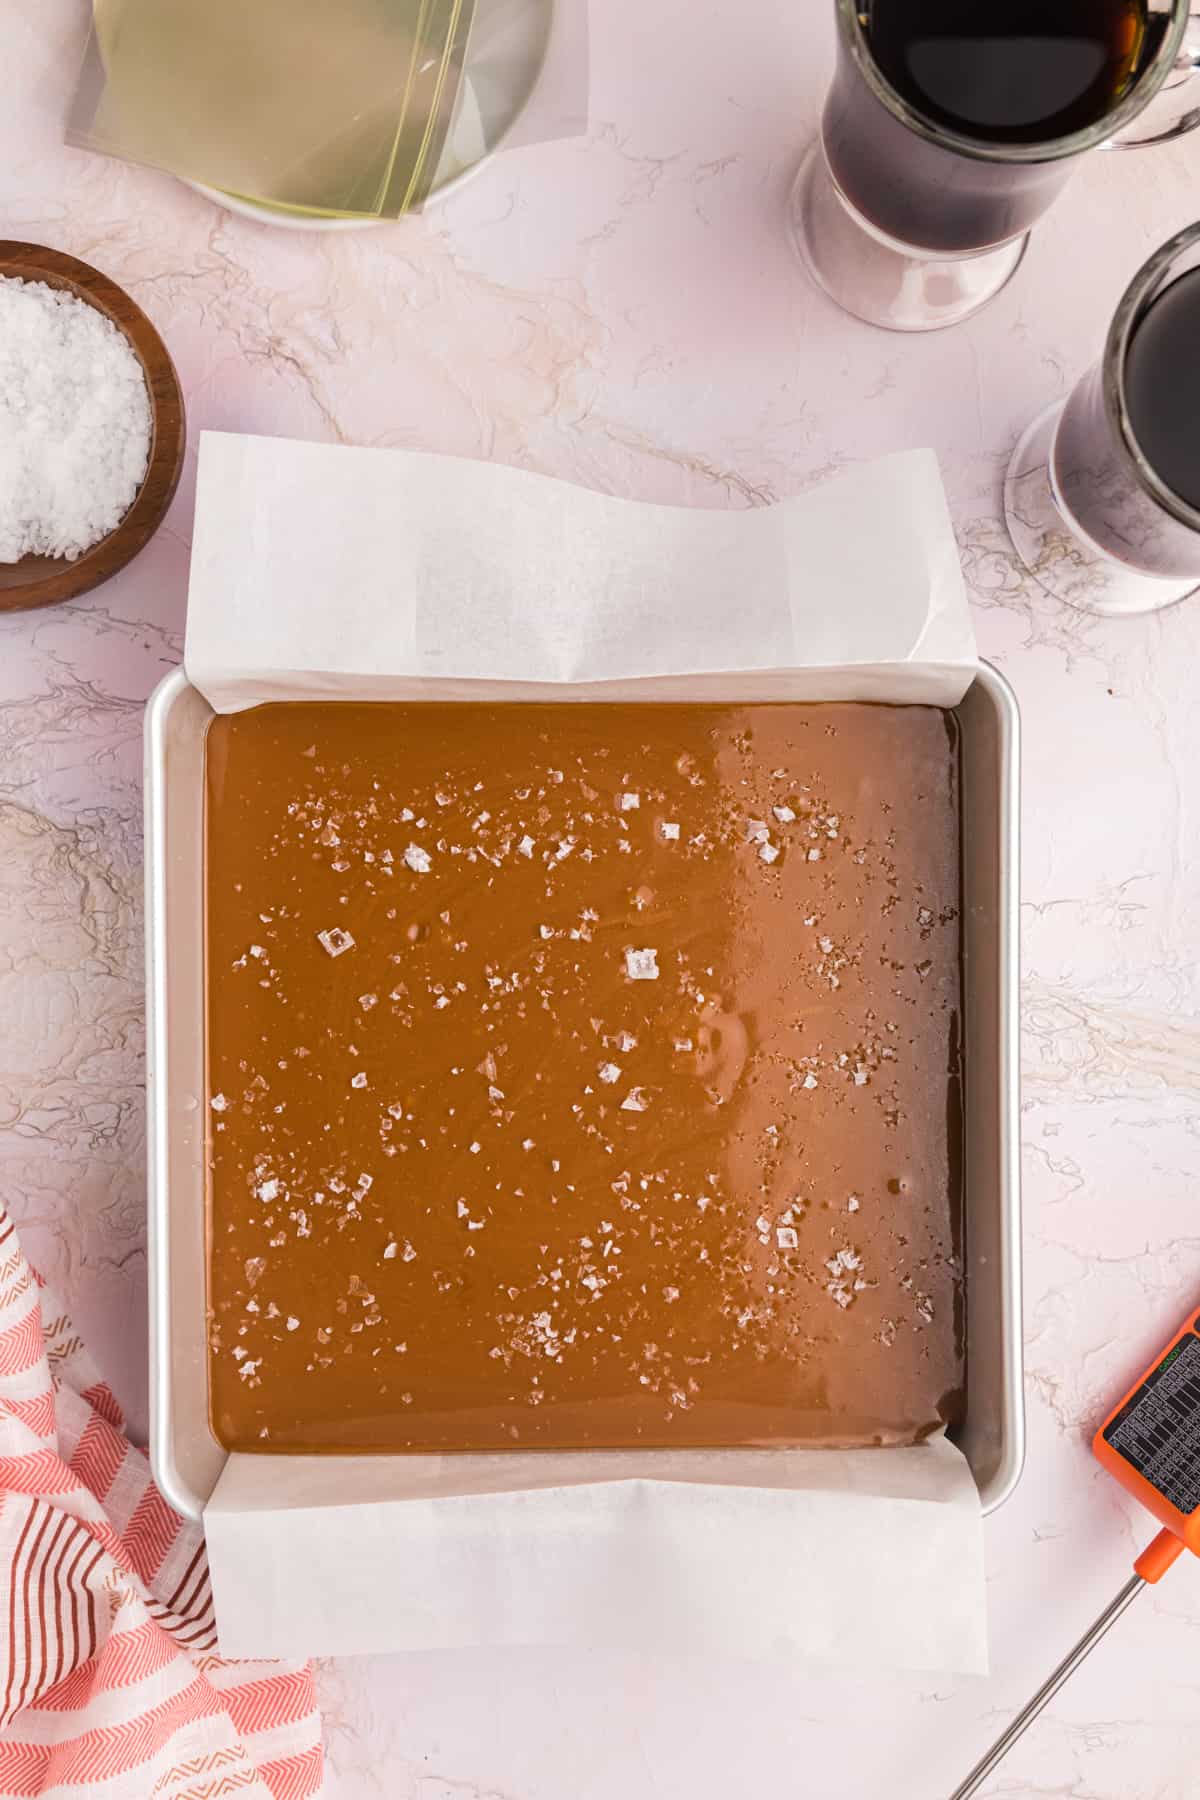 A pan is filled with uncut caramel.